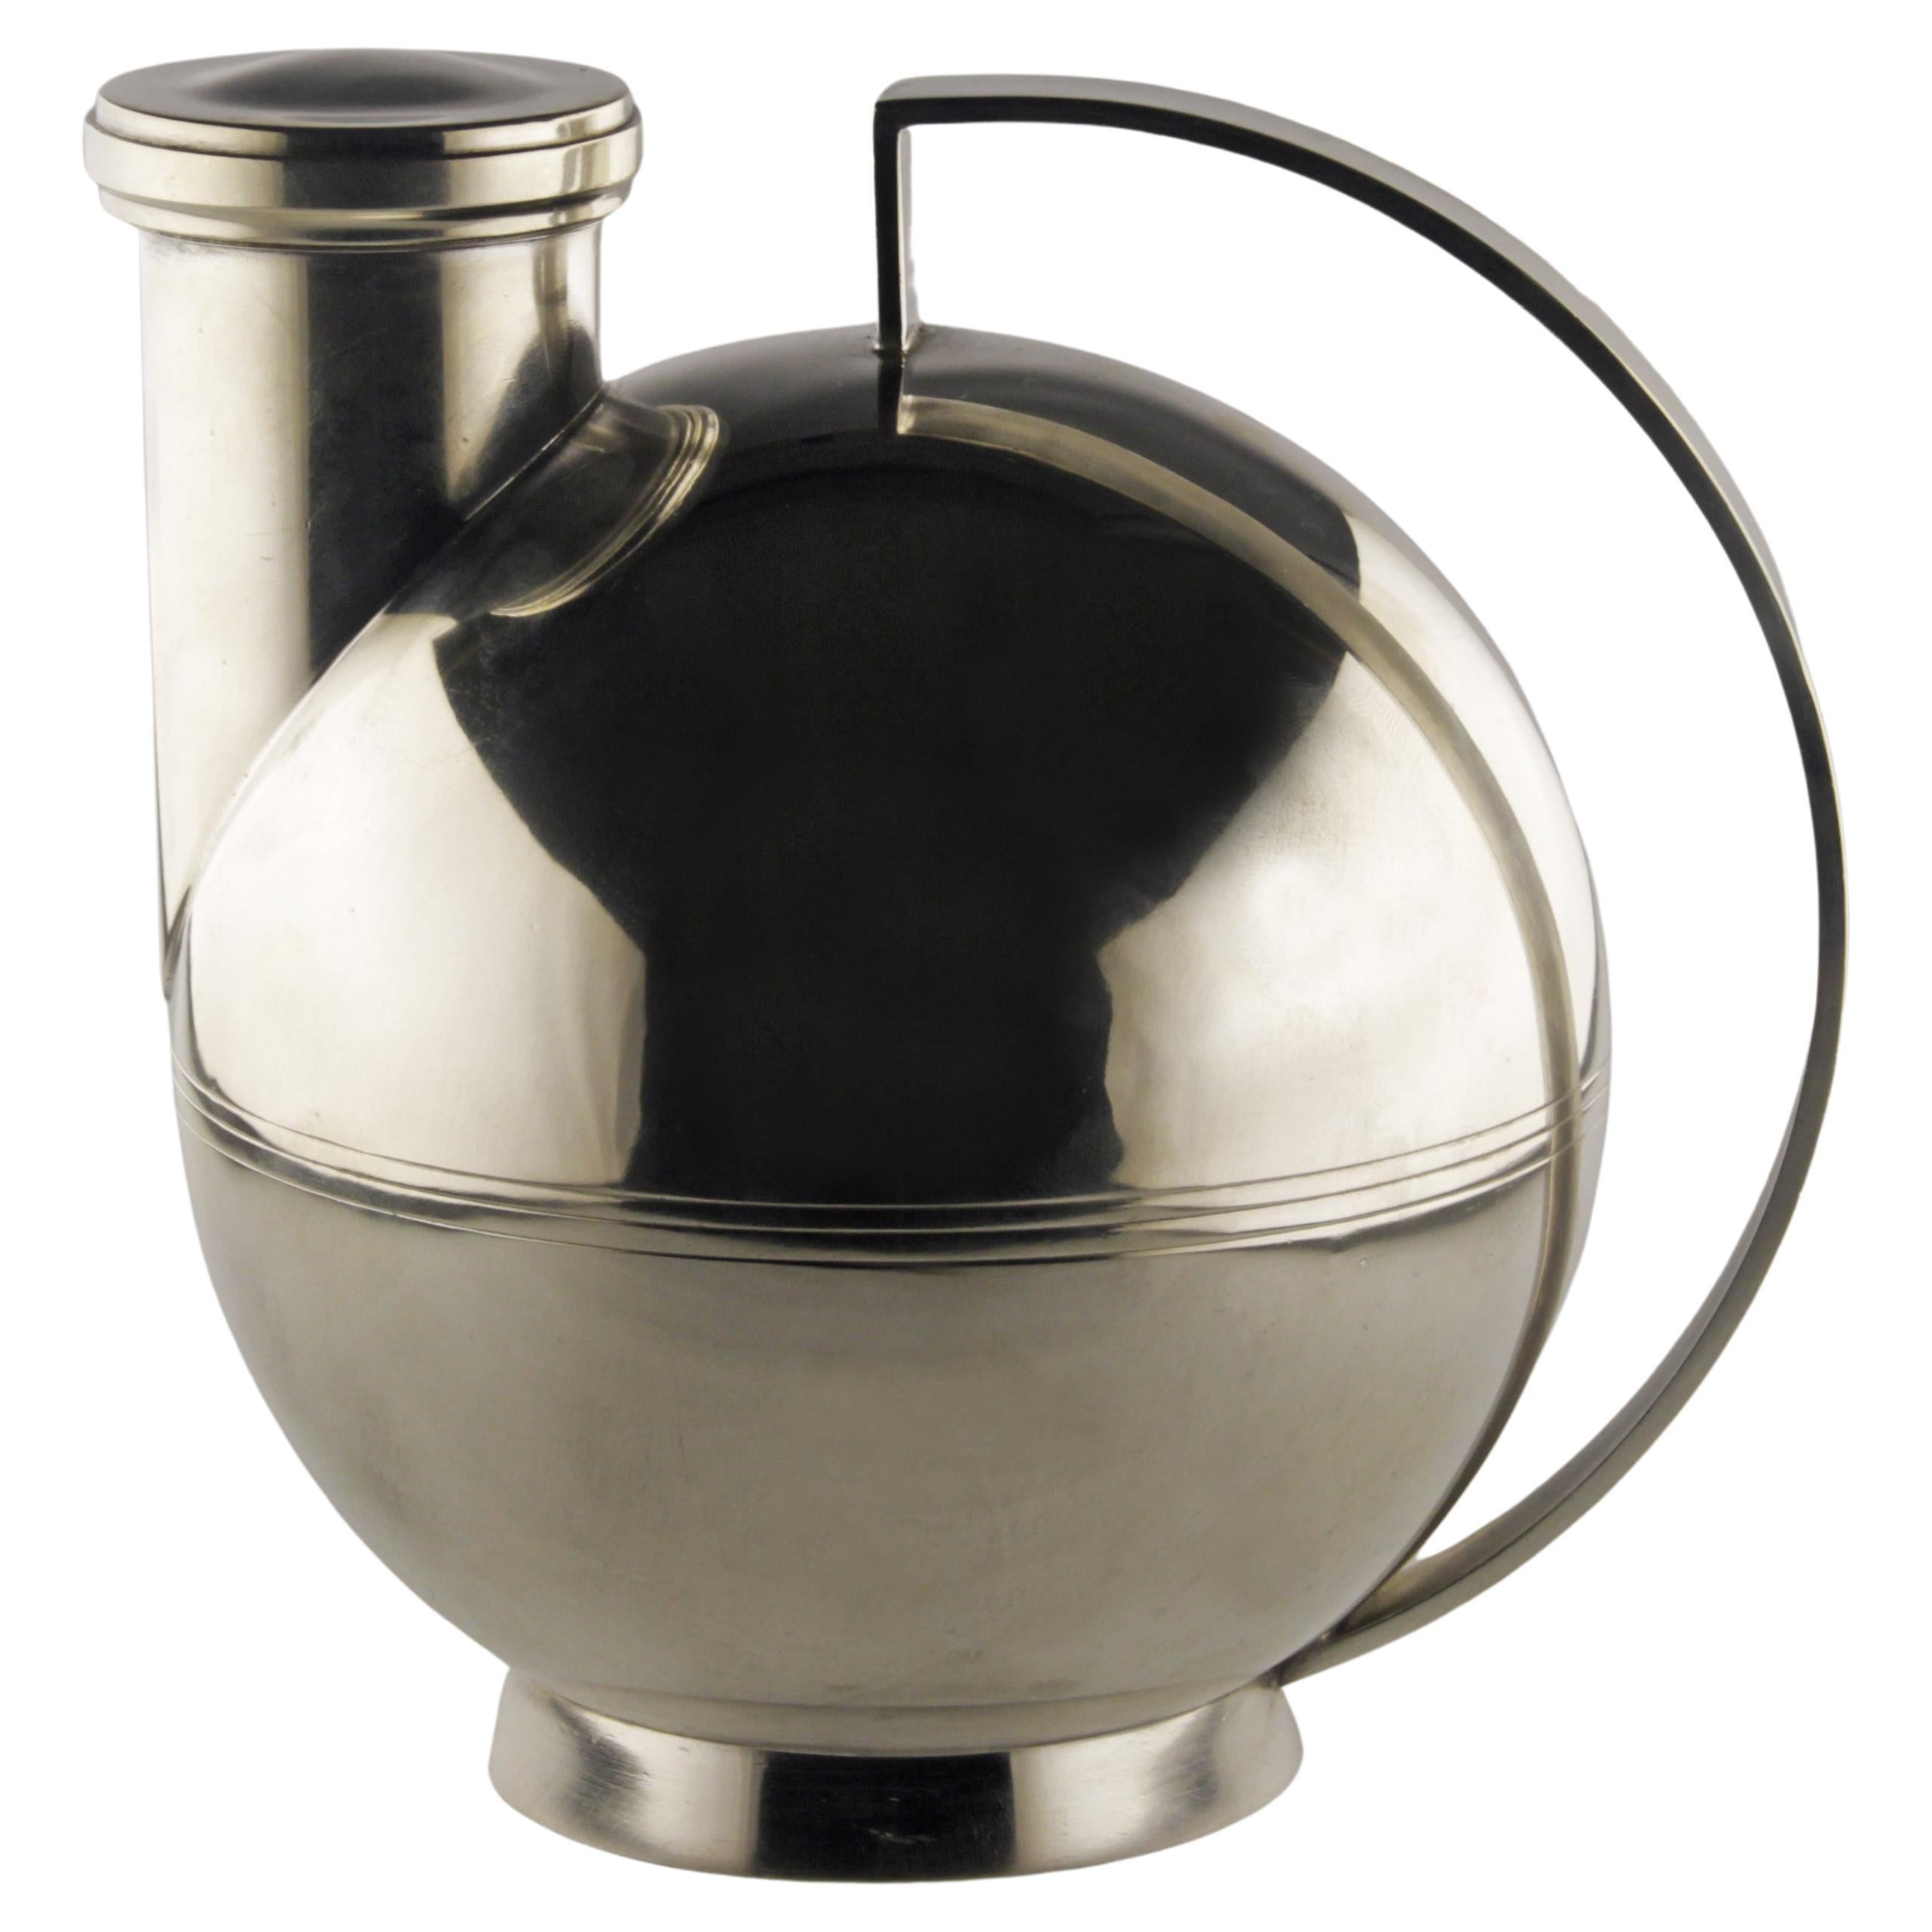 Art Déco/Modernist Silver Spherical Cocktail Shaker by Swedish Sylvia Stave For Sale